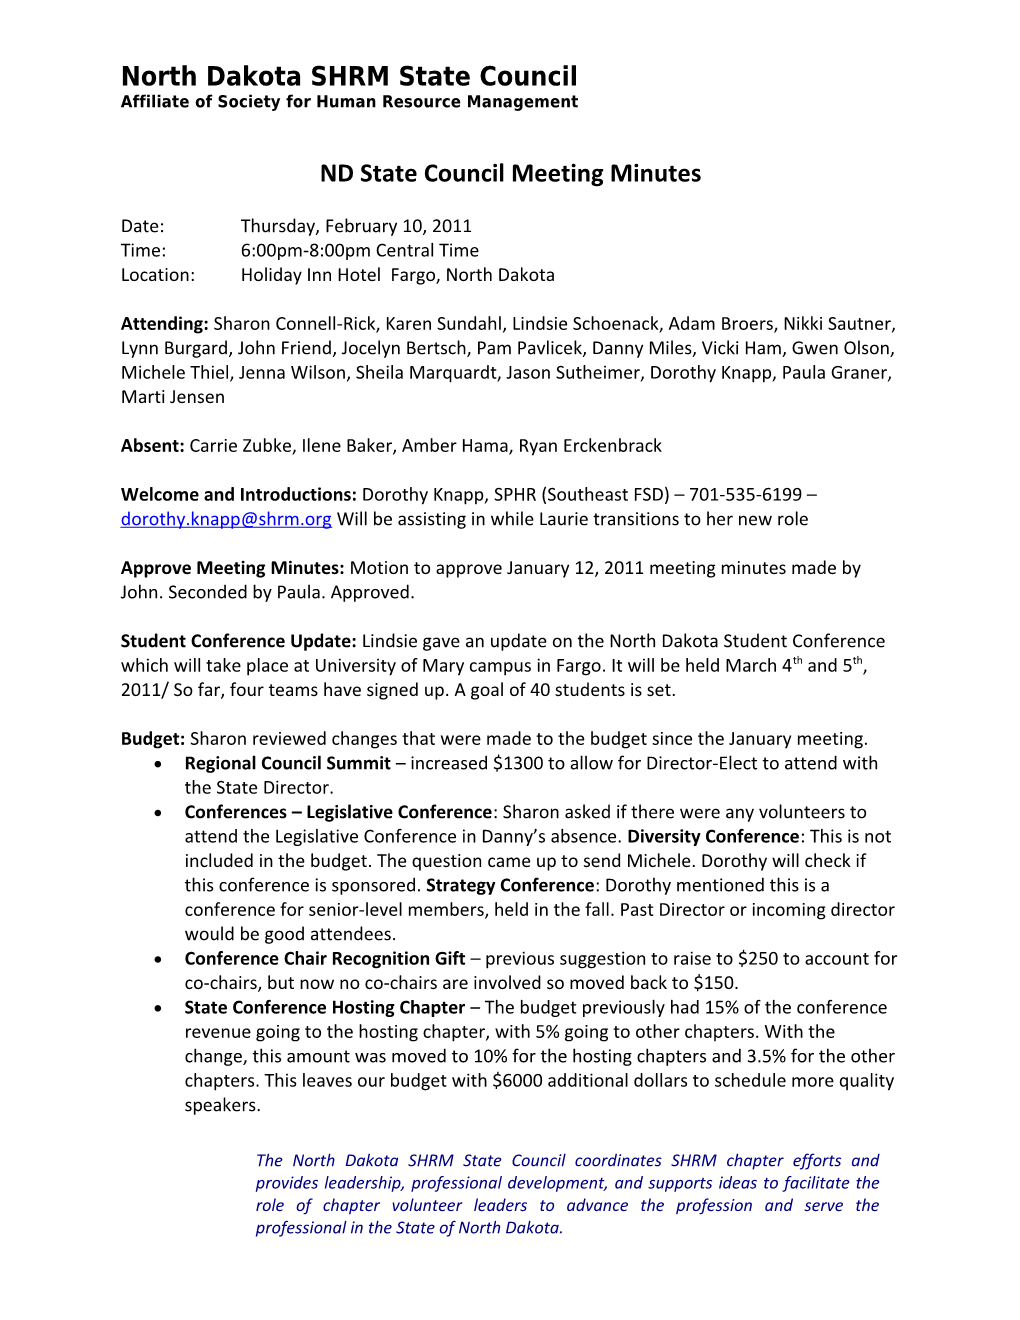 ND State Council Meeting Minutes